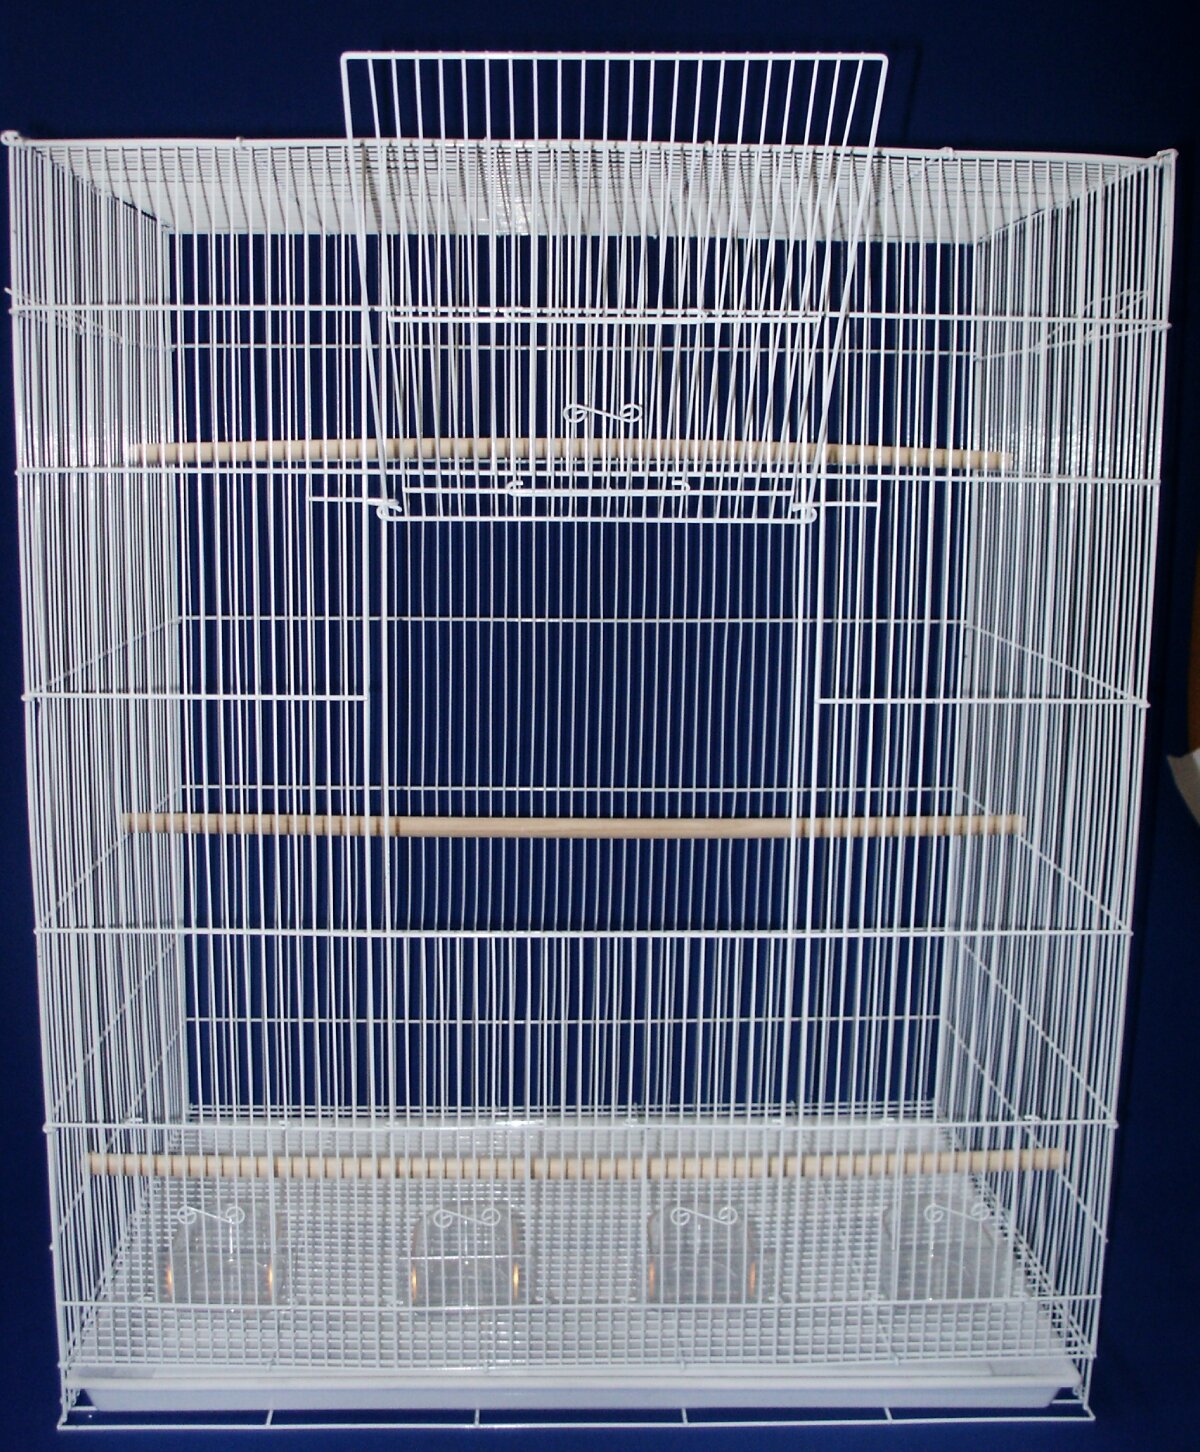 Lot of 6 Blue Aviaries Canaries Budgies Finch Breeding Bird Cages 24x16x16"H *47 